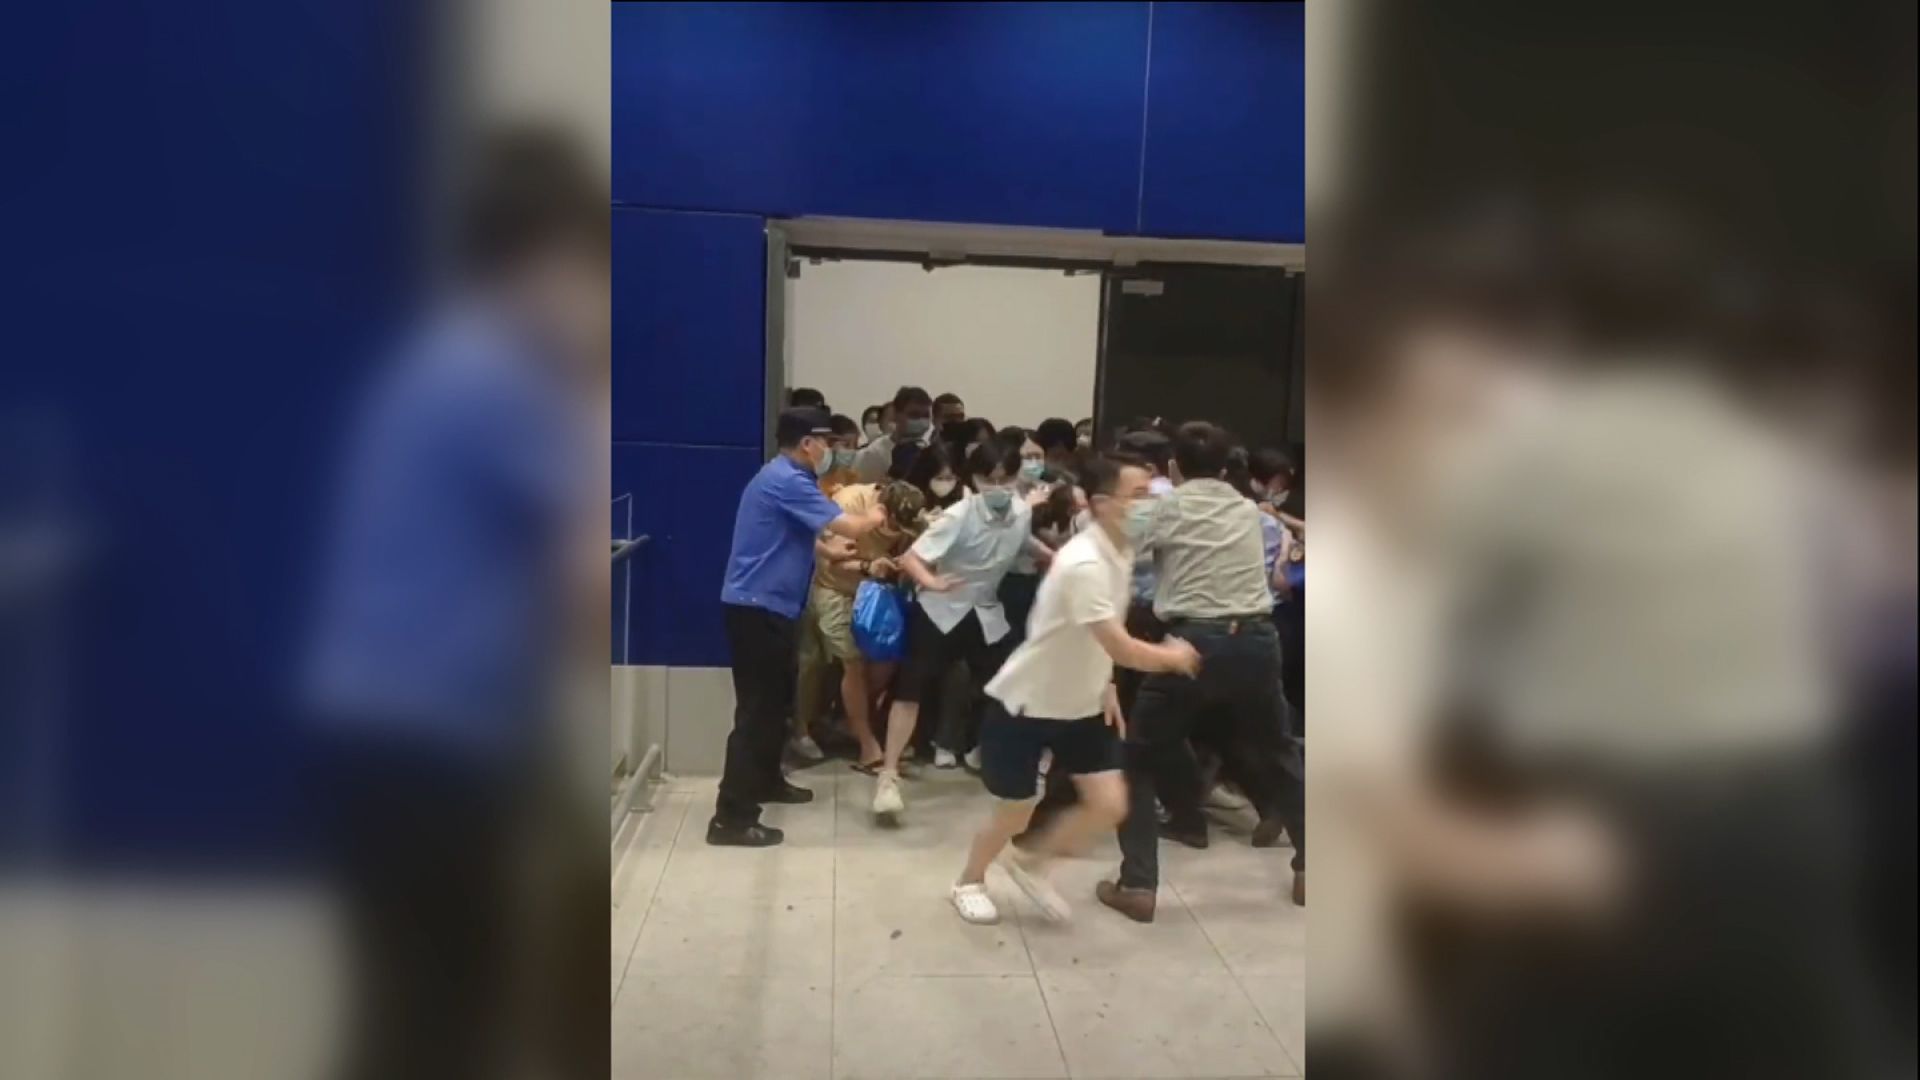 Shanghai China Ikea Shoppers Rush For The Exits As Store Goes Into Covid Lockdown Cnn